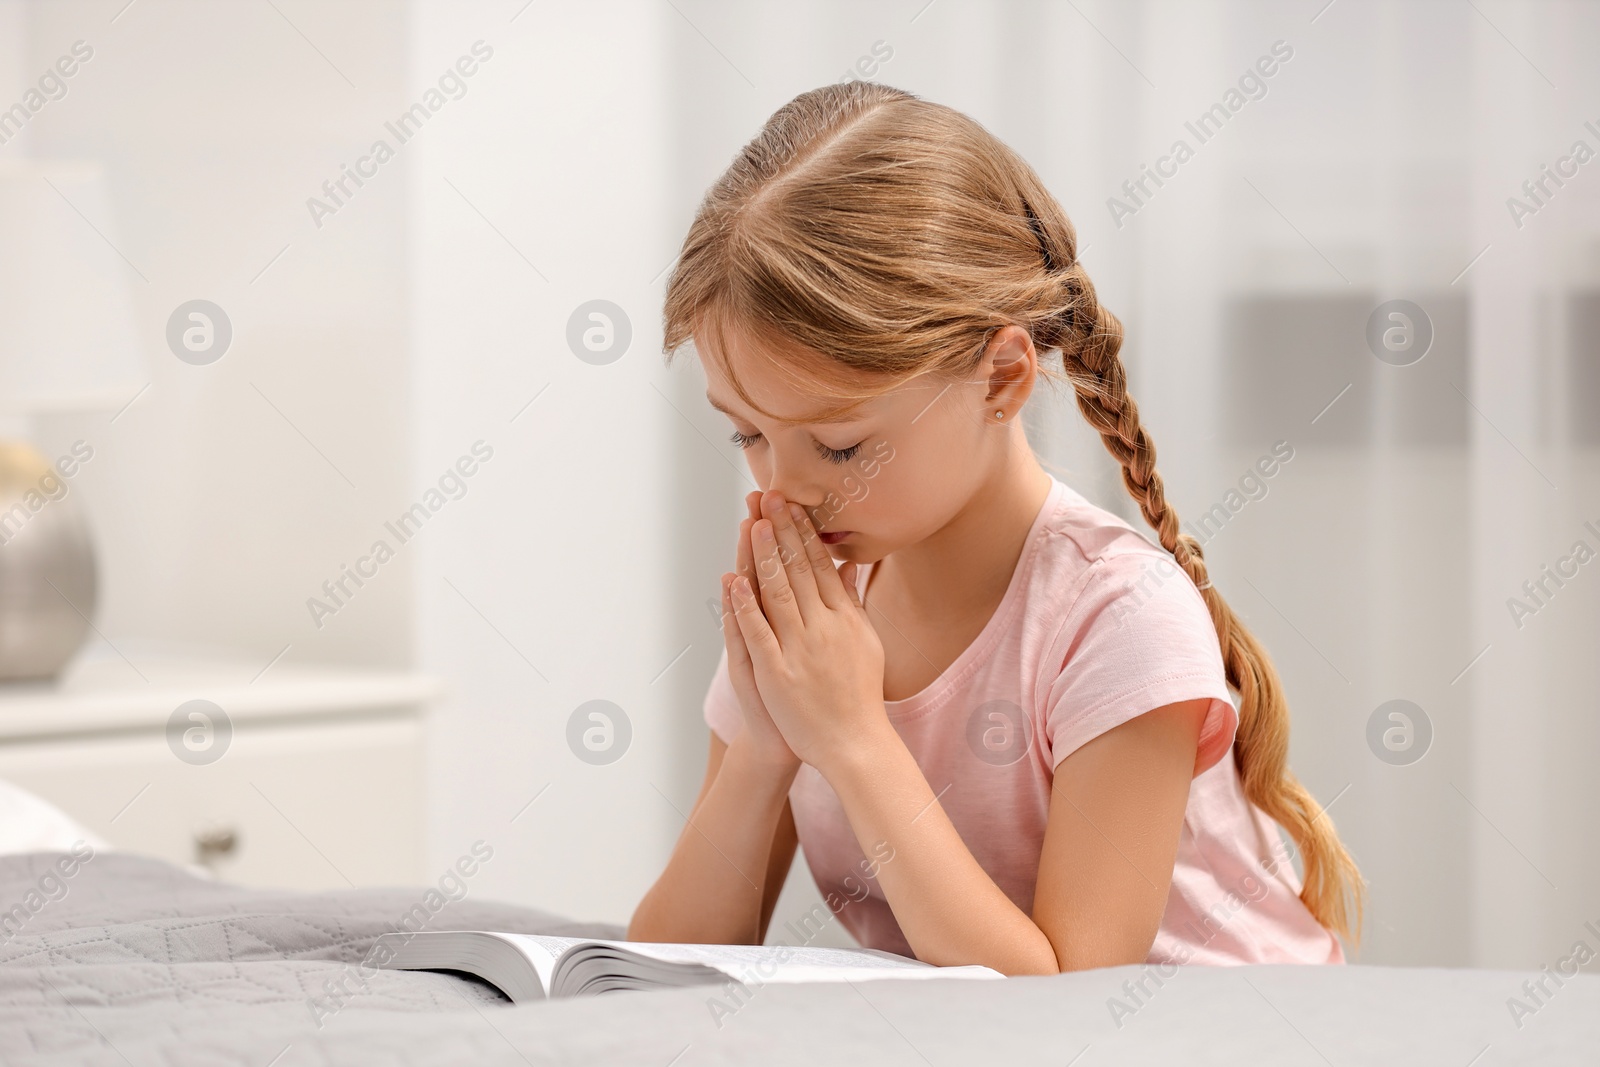 Photo of Girl holding hands clasped while praying over Bible in room